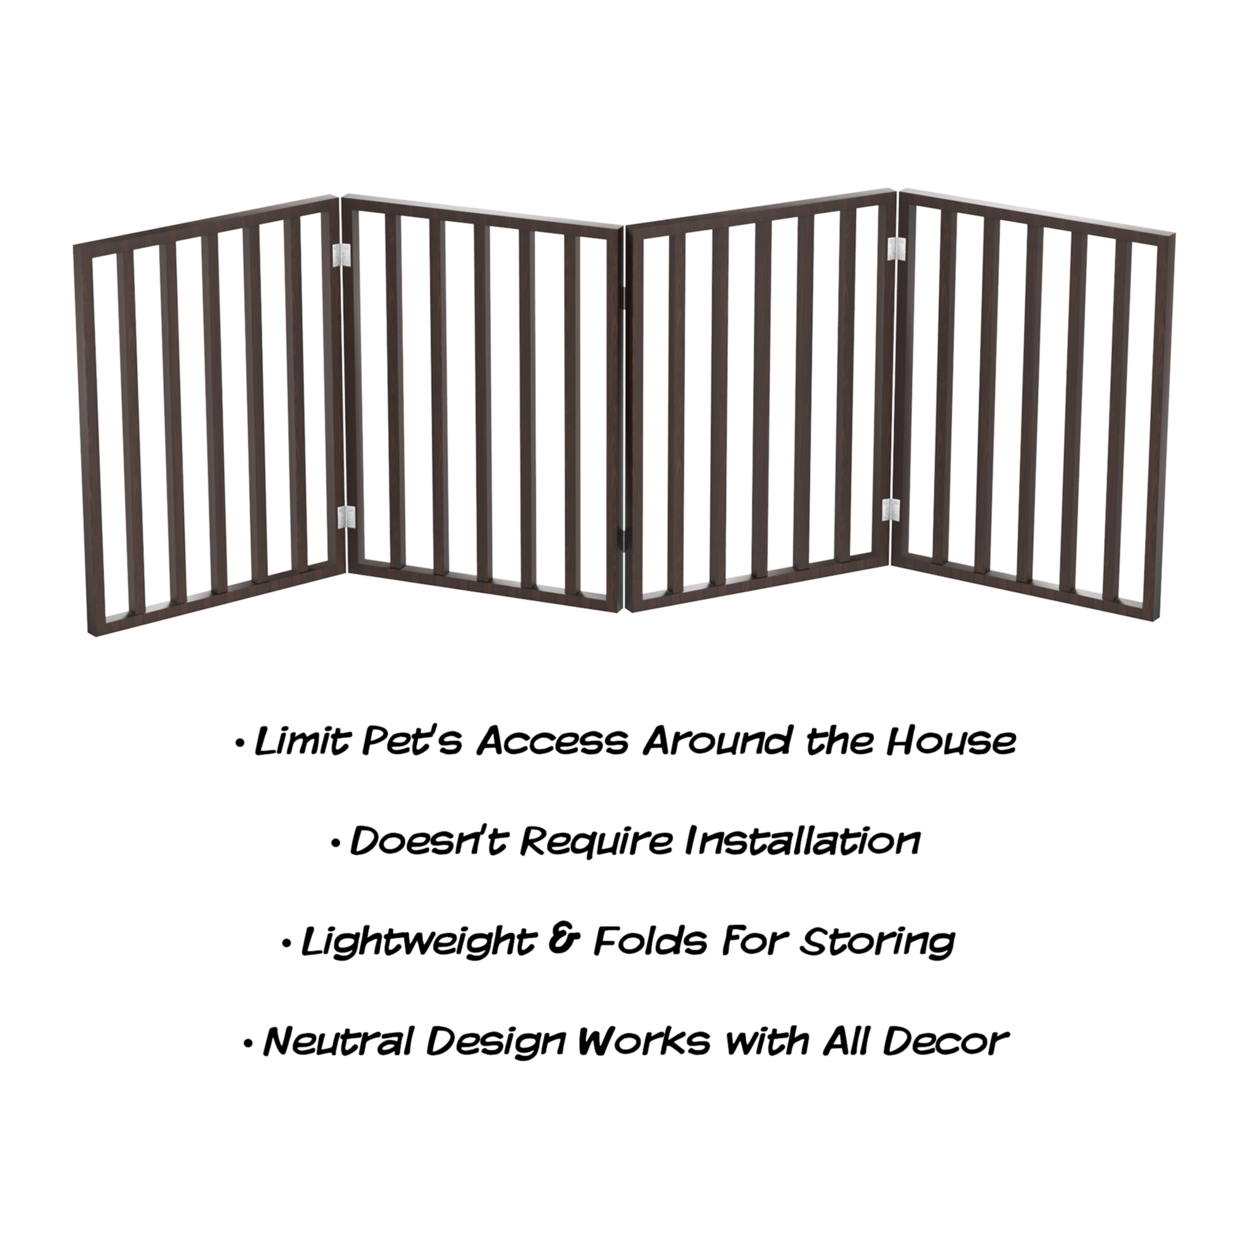 Wooden Pet Gate- Foldable 4-Panel Indoor Barrier Fence, Freestanding And Lightweight Design For Dogs, Puppies, Pets- 72 X24 (Brown Stain)